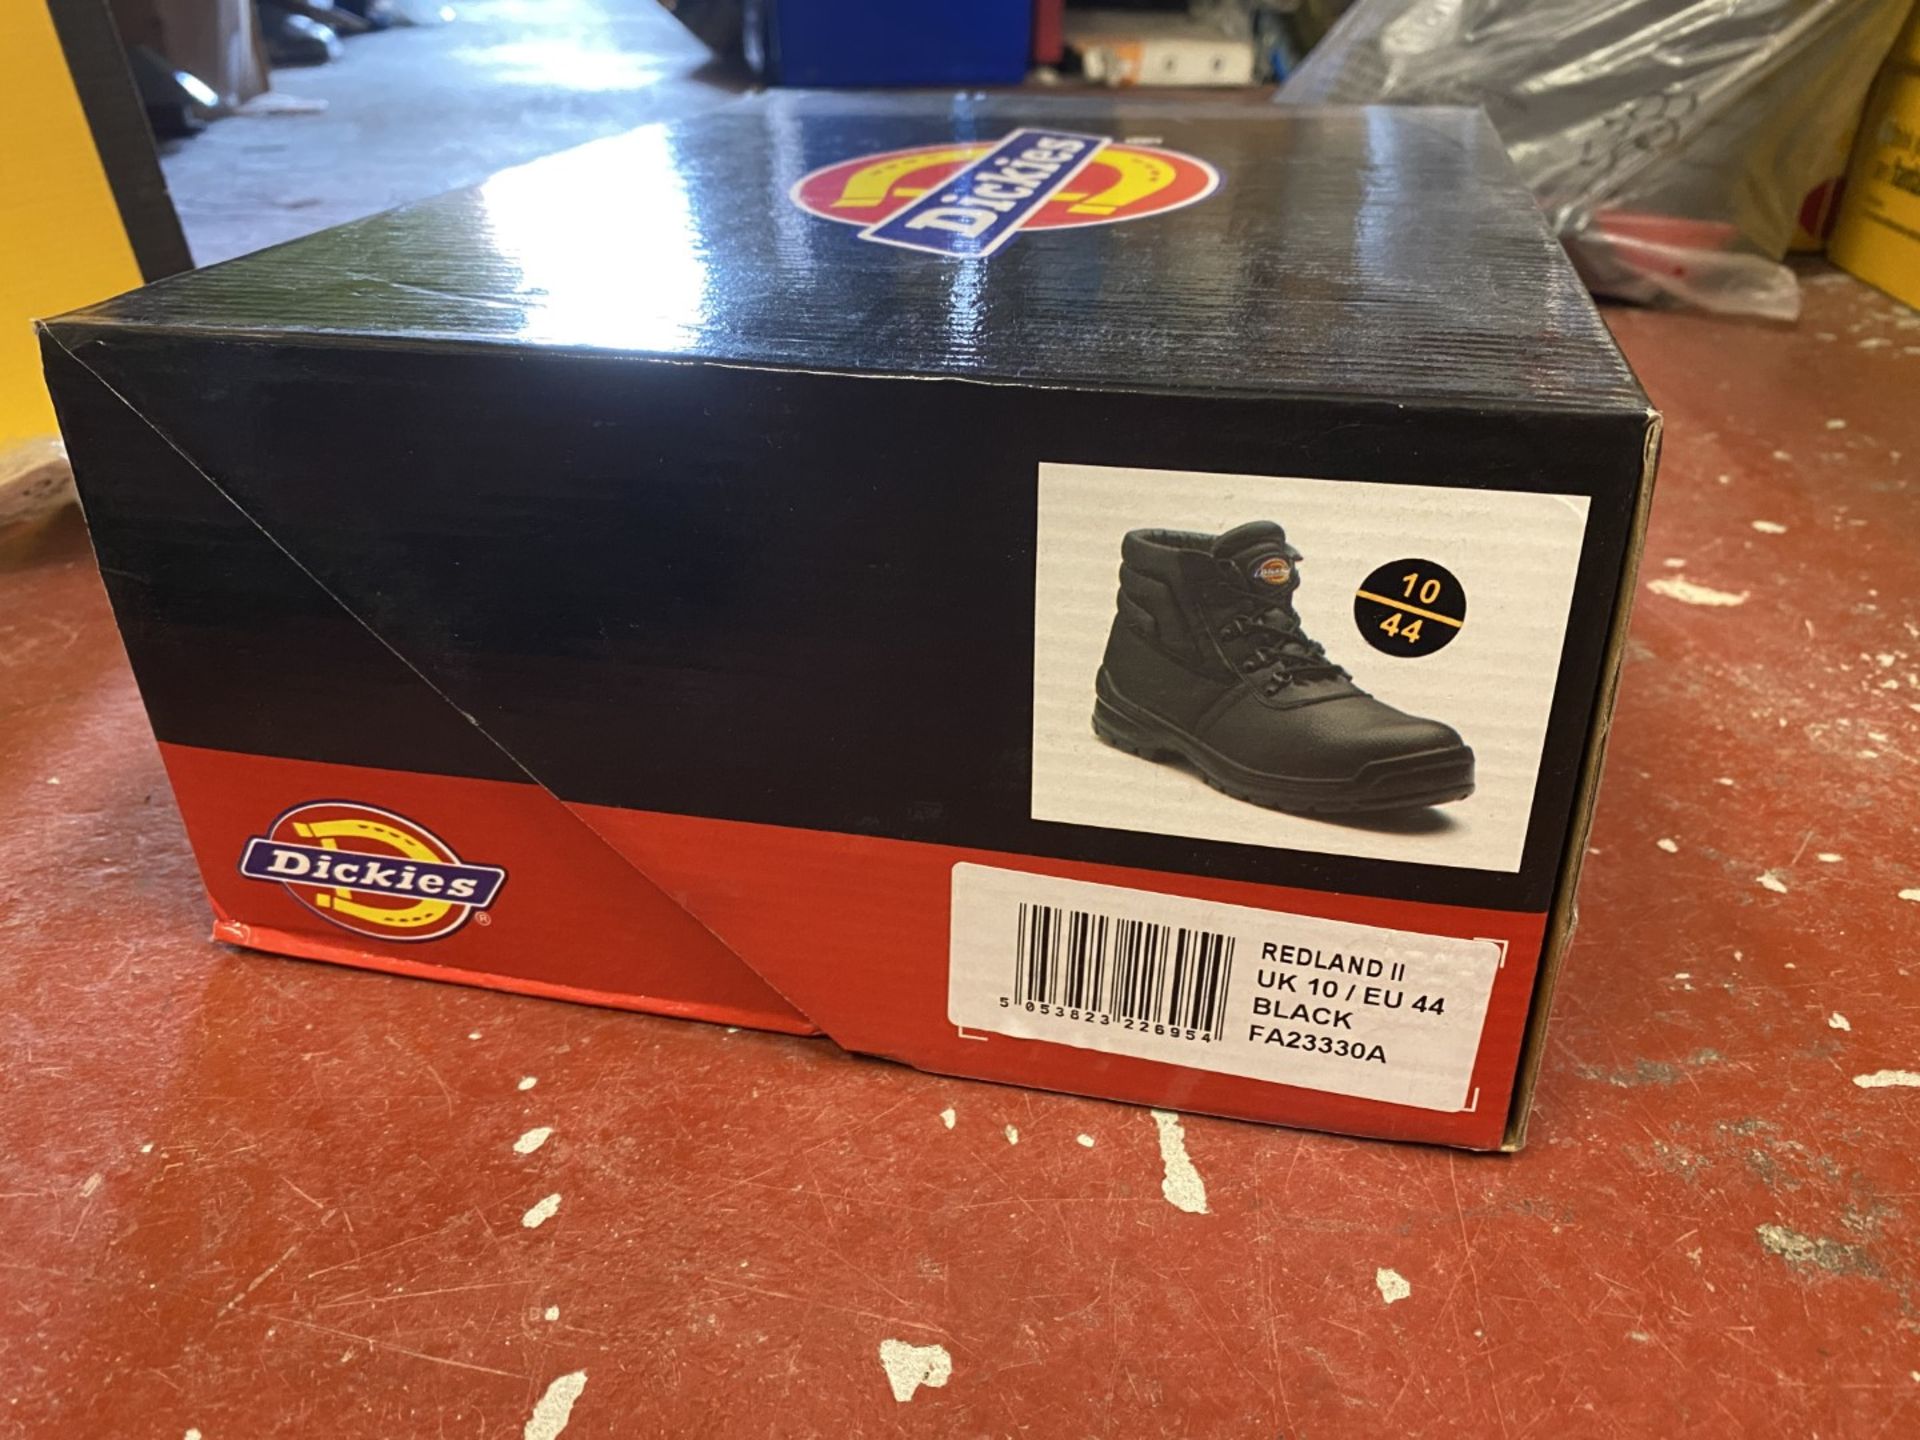 NEW Dickies safety boots, UK size 10